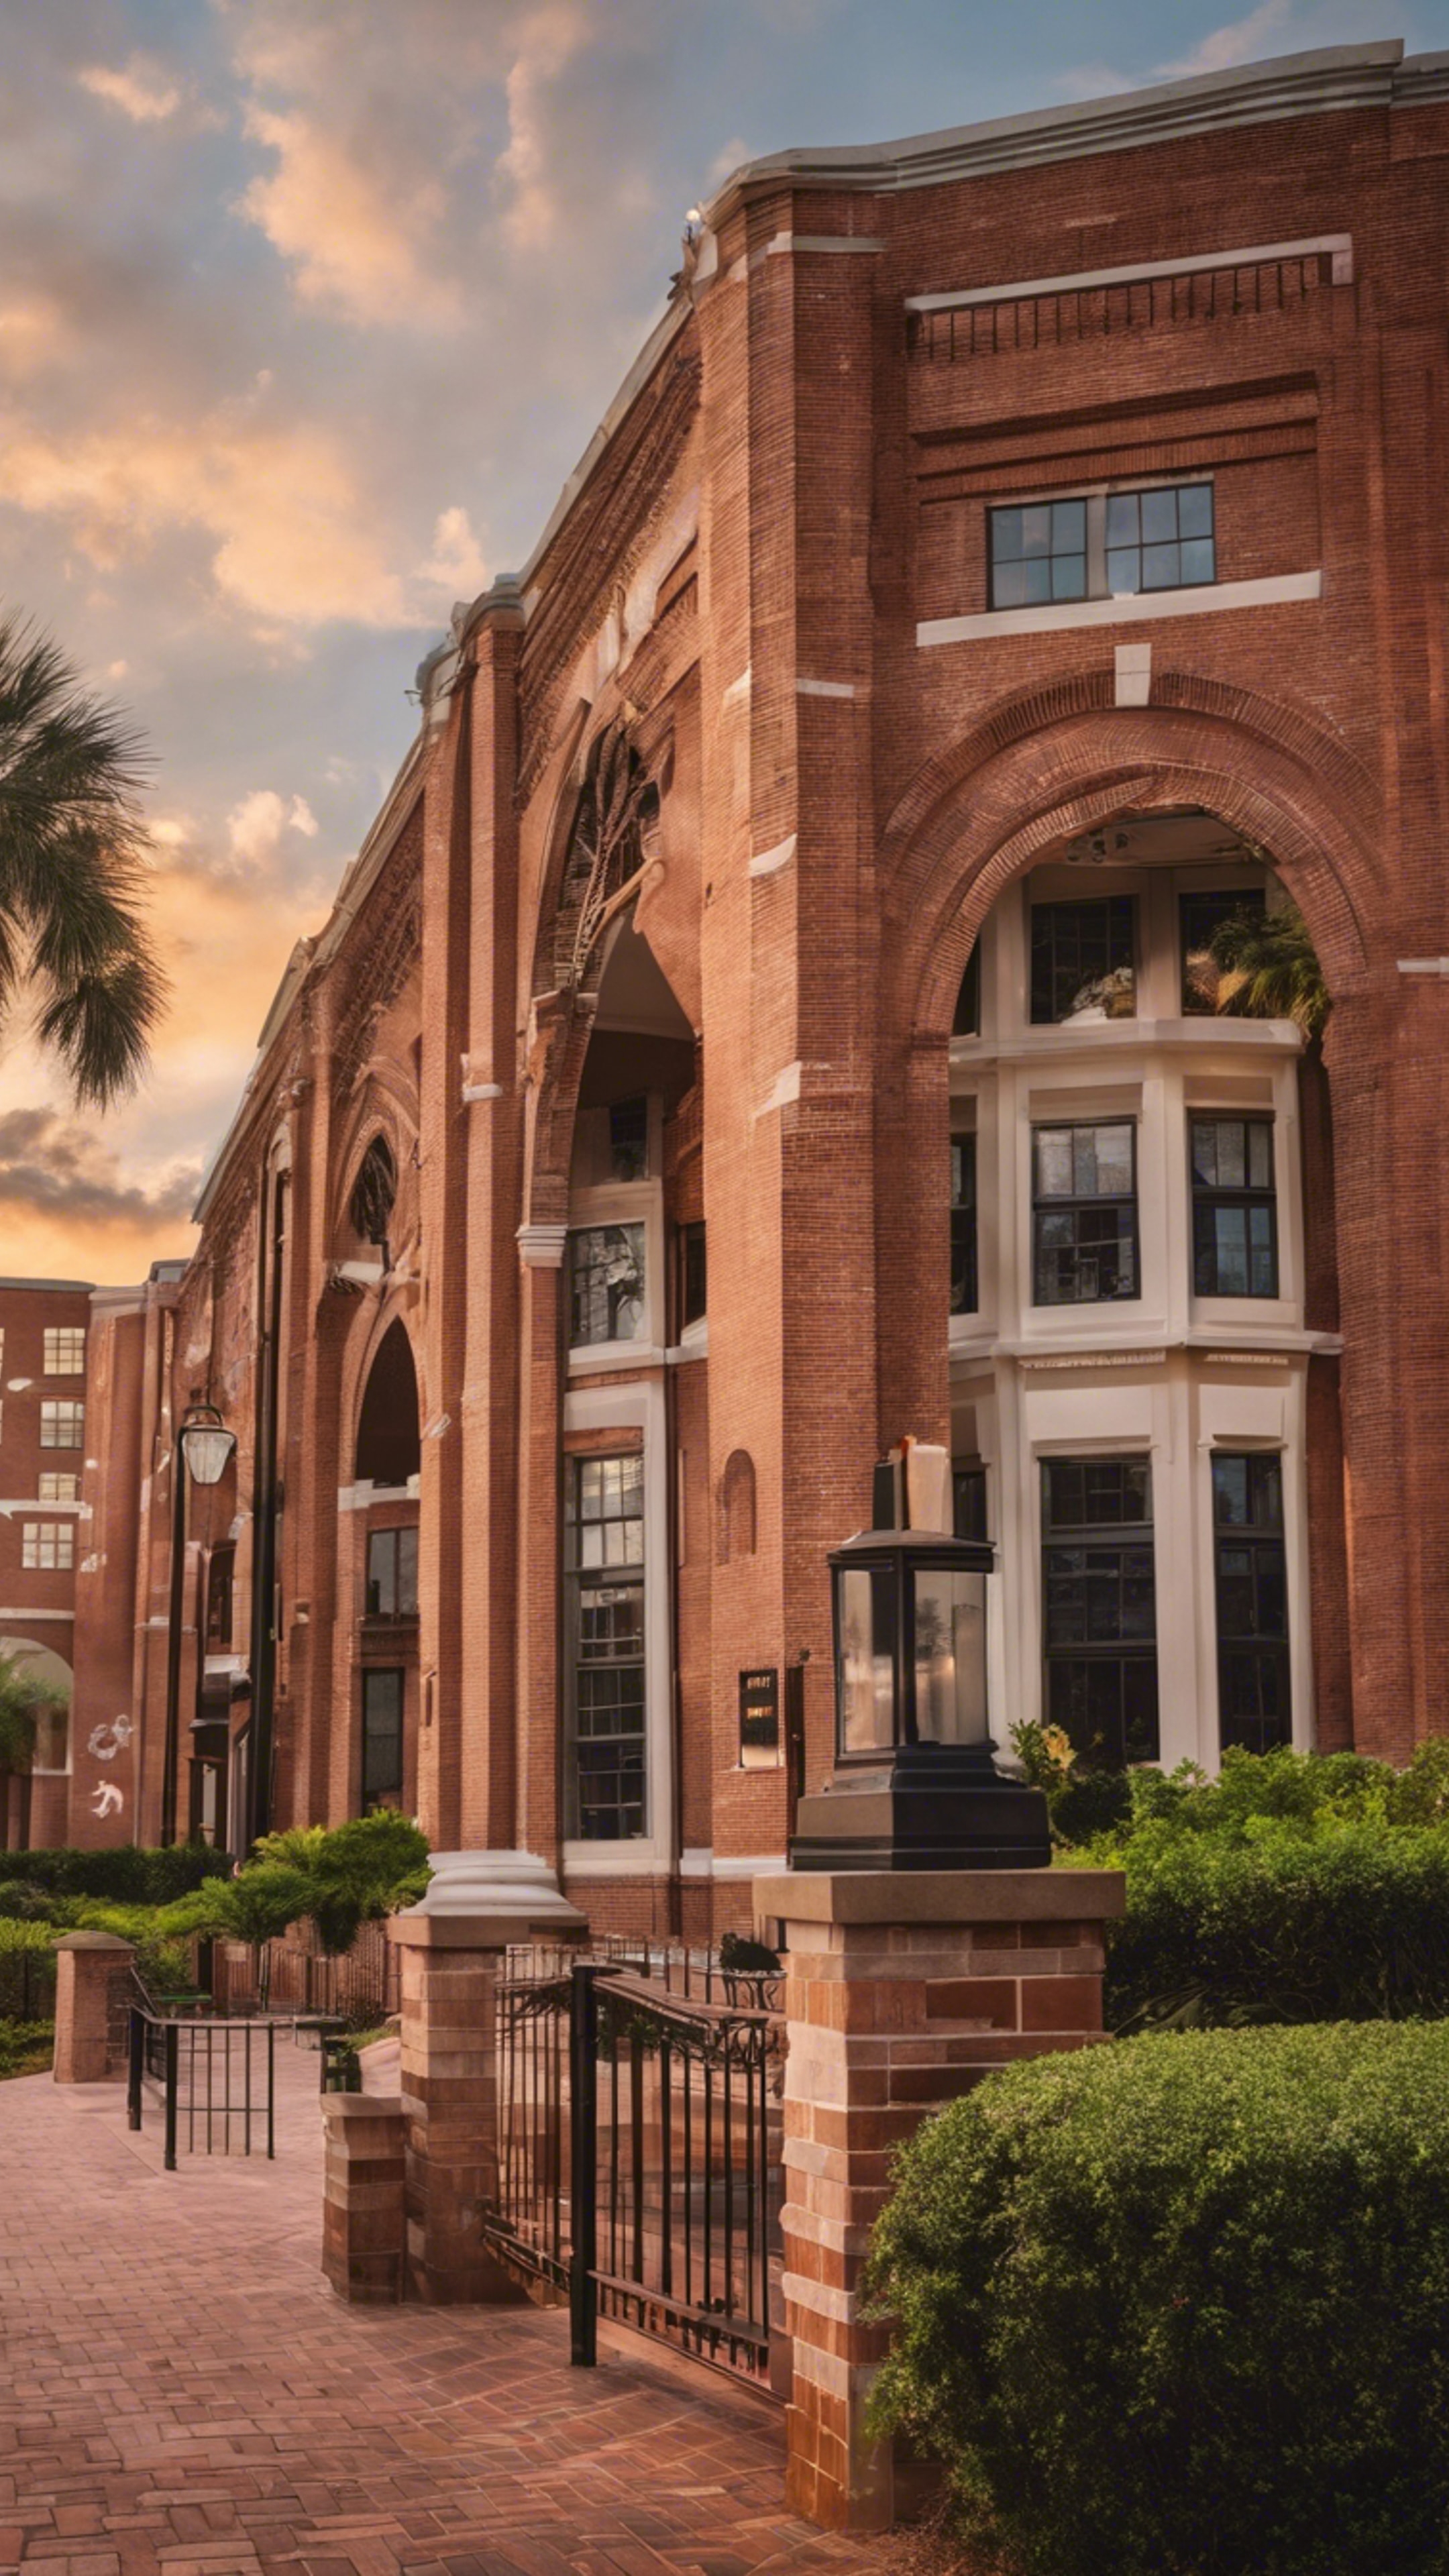 The Florida State University campus, its grand, brick academic buildings glowing under the sunset.壁紙[2f1797a15cd44adf931f]